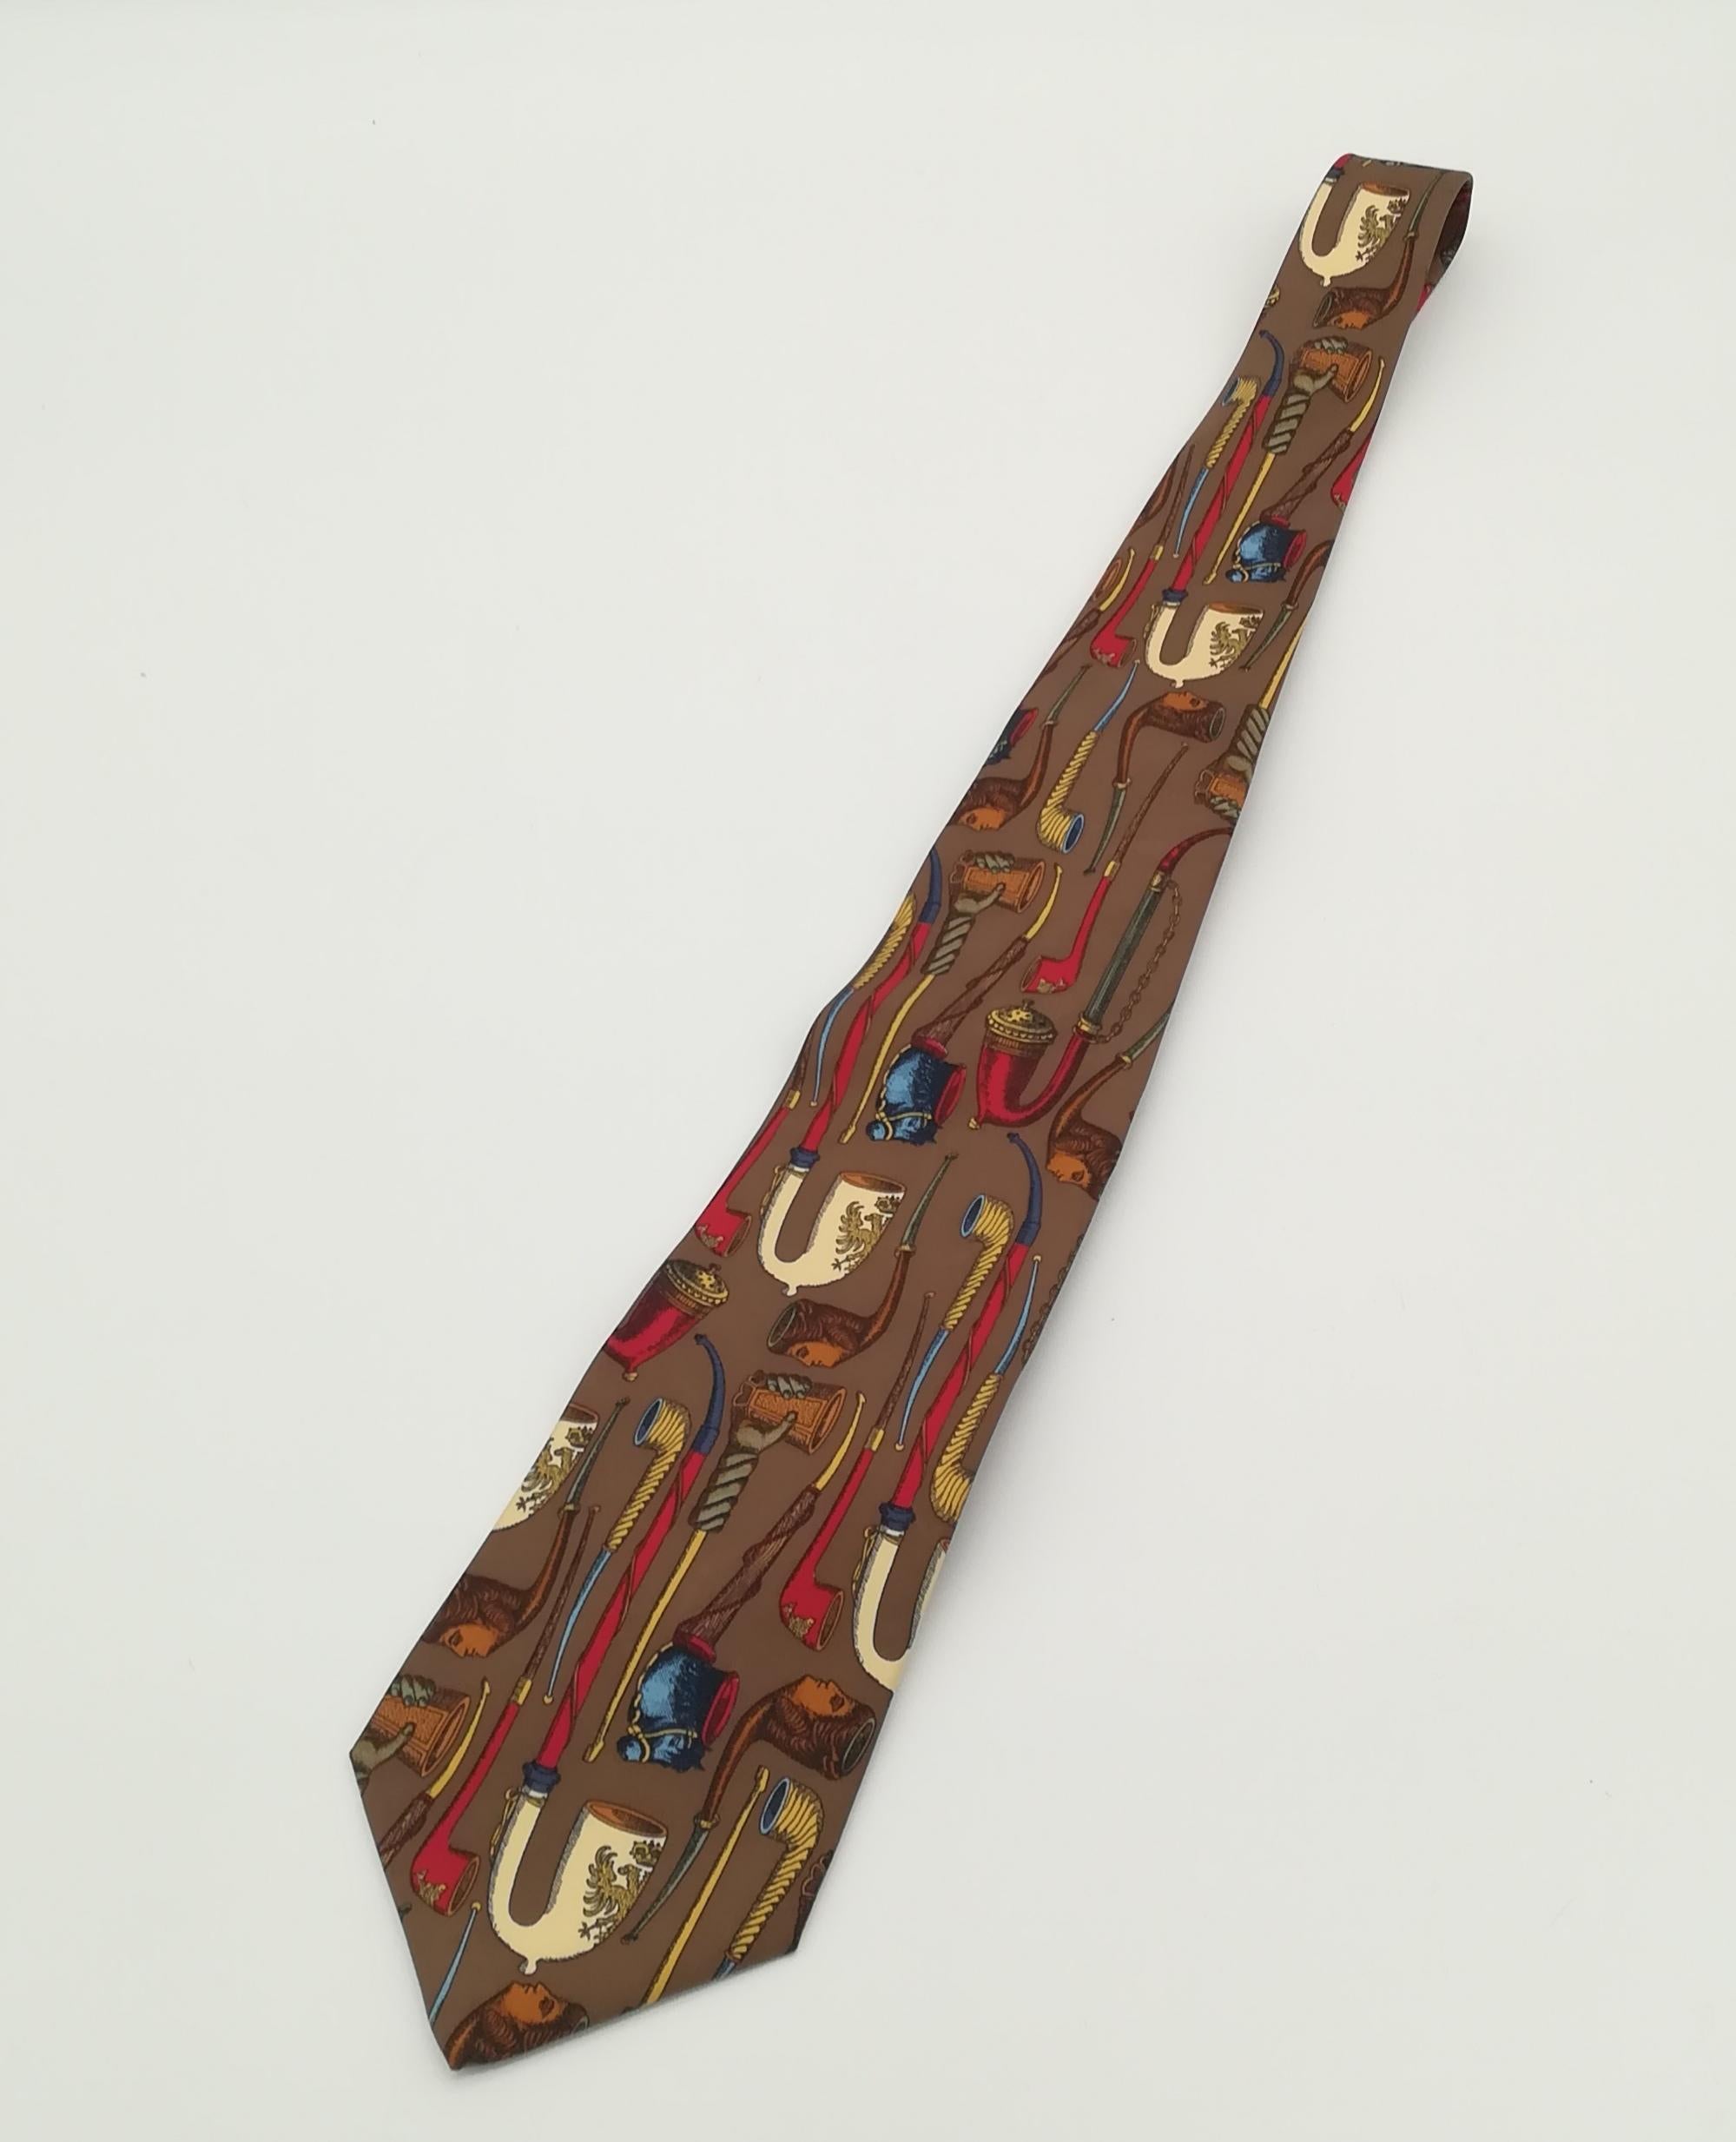 This tie, designed around 1970's by well-known Italian artist Piero Fornasetti and currently not anymore in production, features an original and classy pipe pattern. Excellently preserved, it presents its authentic condition and still has its